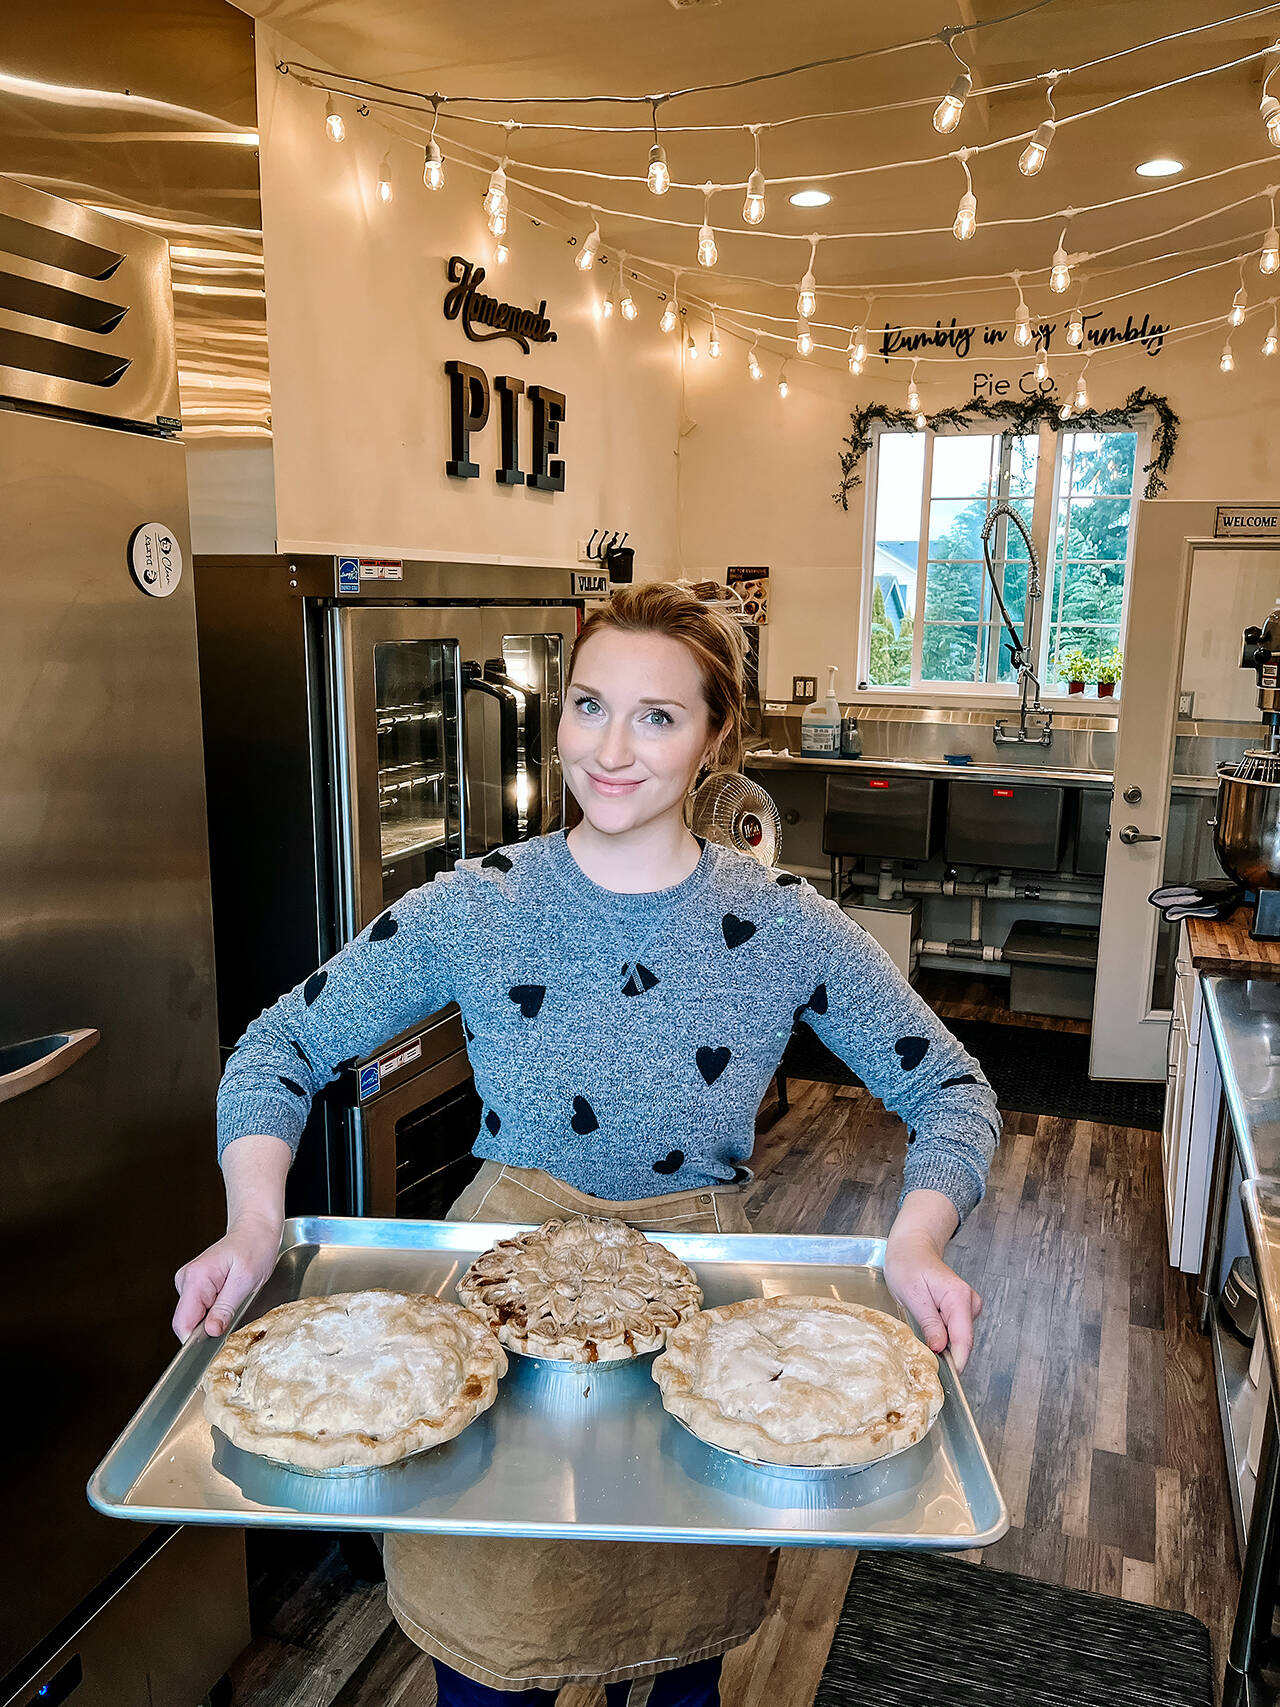 Shannon McDowell relies on social media to advertise and sell her pies under Rumbly in My Tumbly, her online cottage bakery based in Lynnwood. She often sells out minutes after posting a photo to her business’s Facebook page. (Photo courtesy of Shannon McDowell)